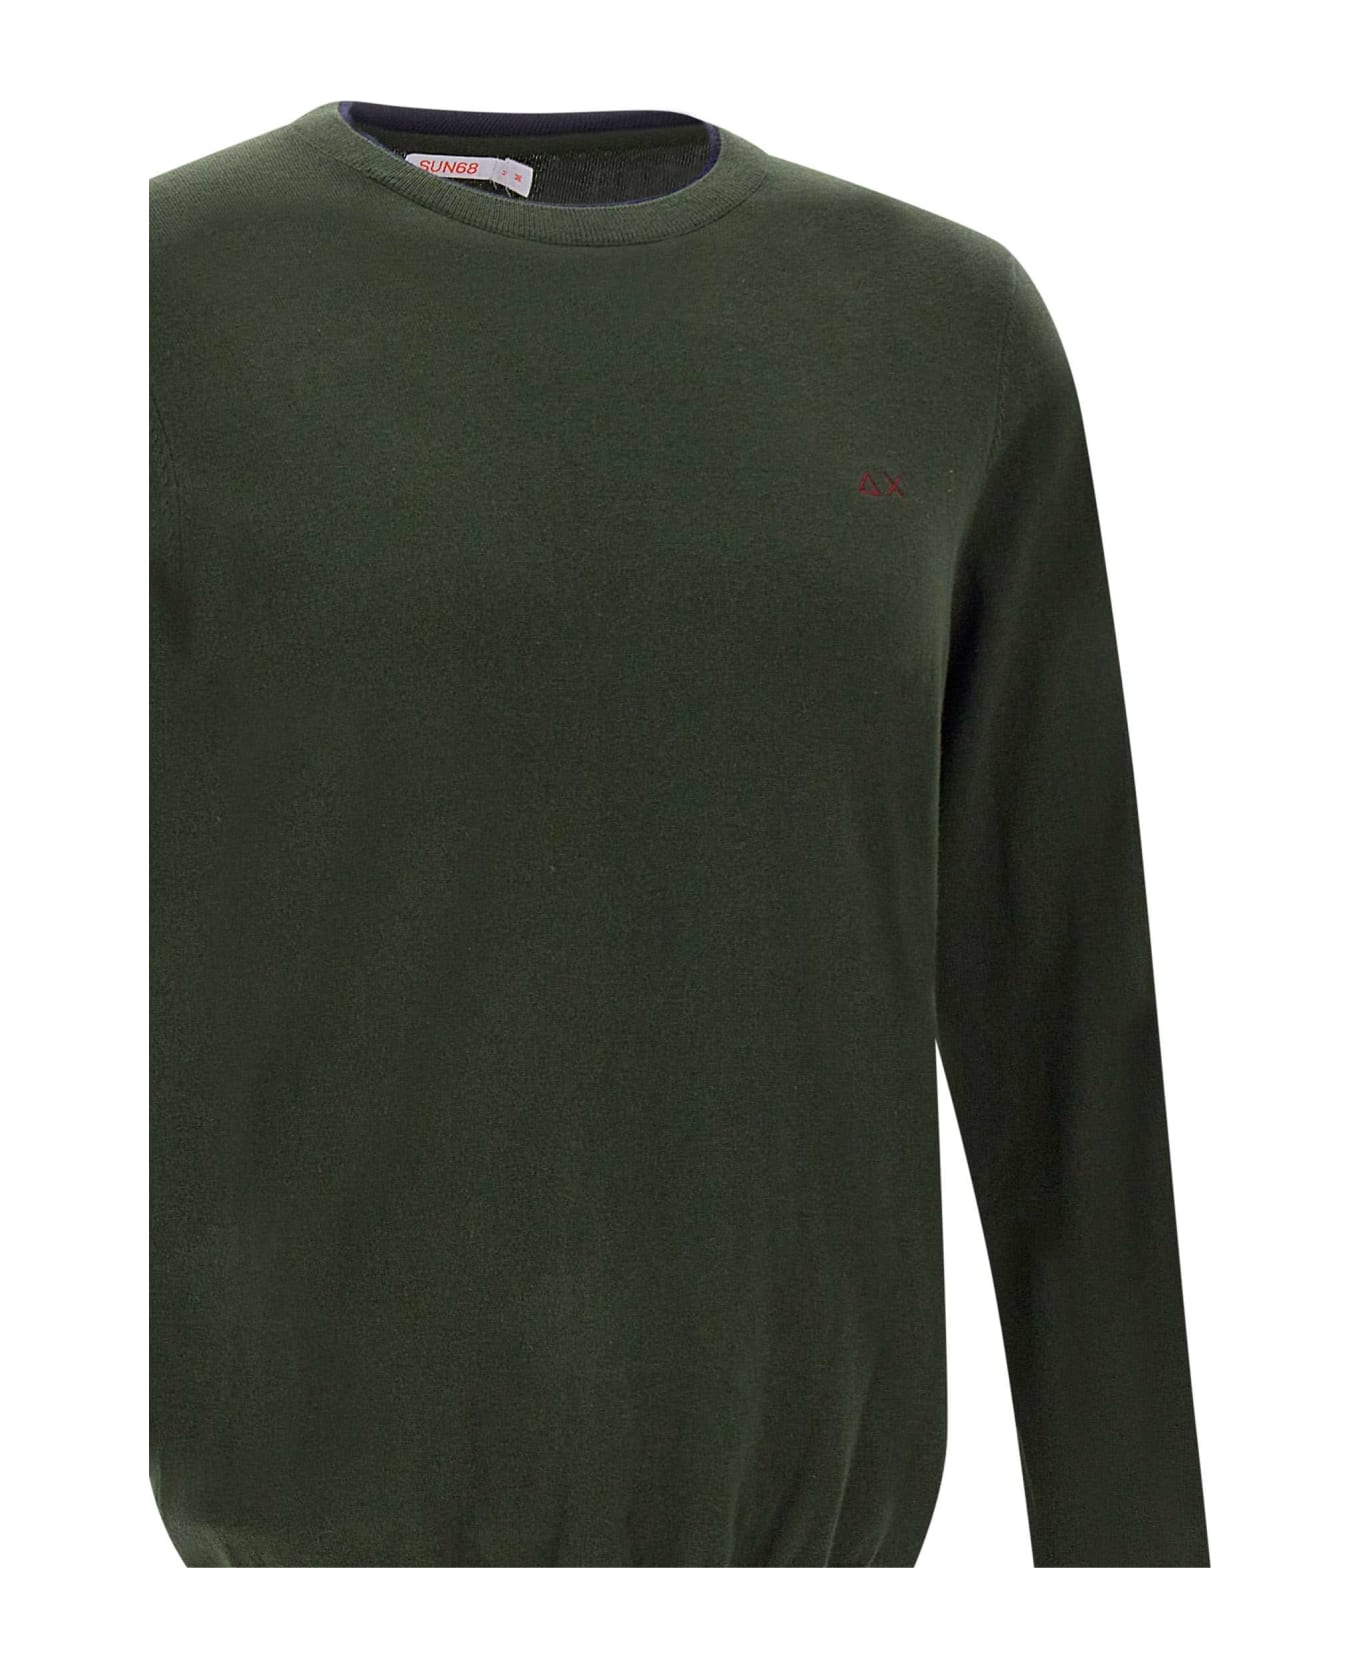 Sun 68 'round Double' Cotton And Wool Pullover Sweater - MILITARE ニットウェア